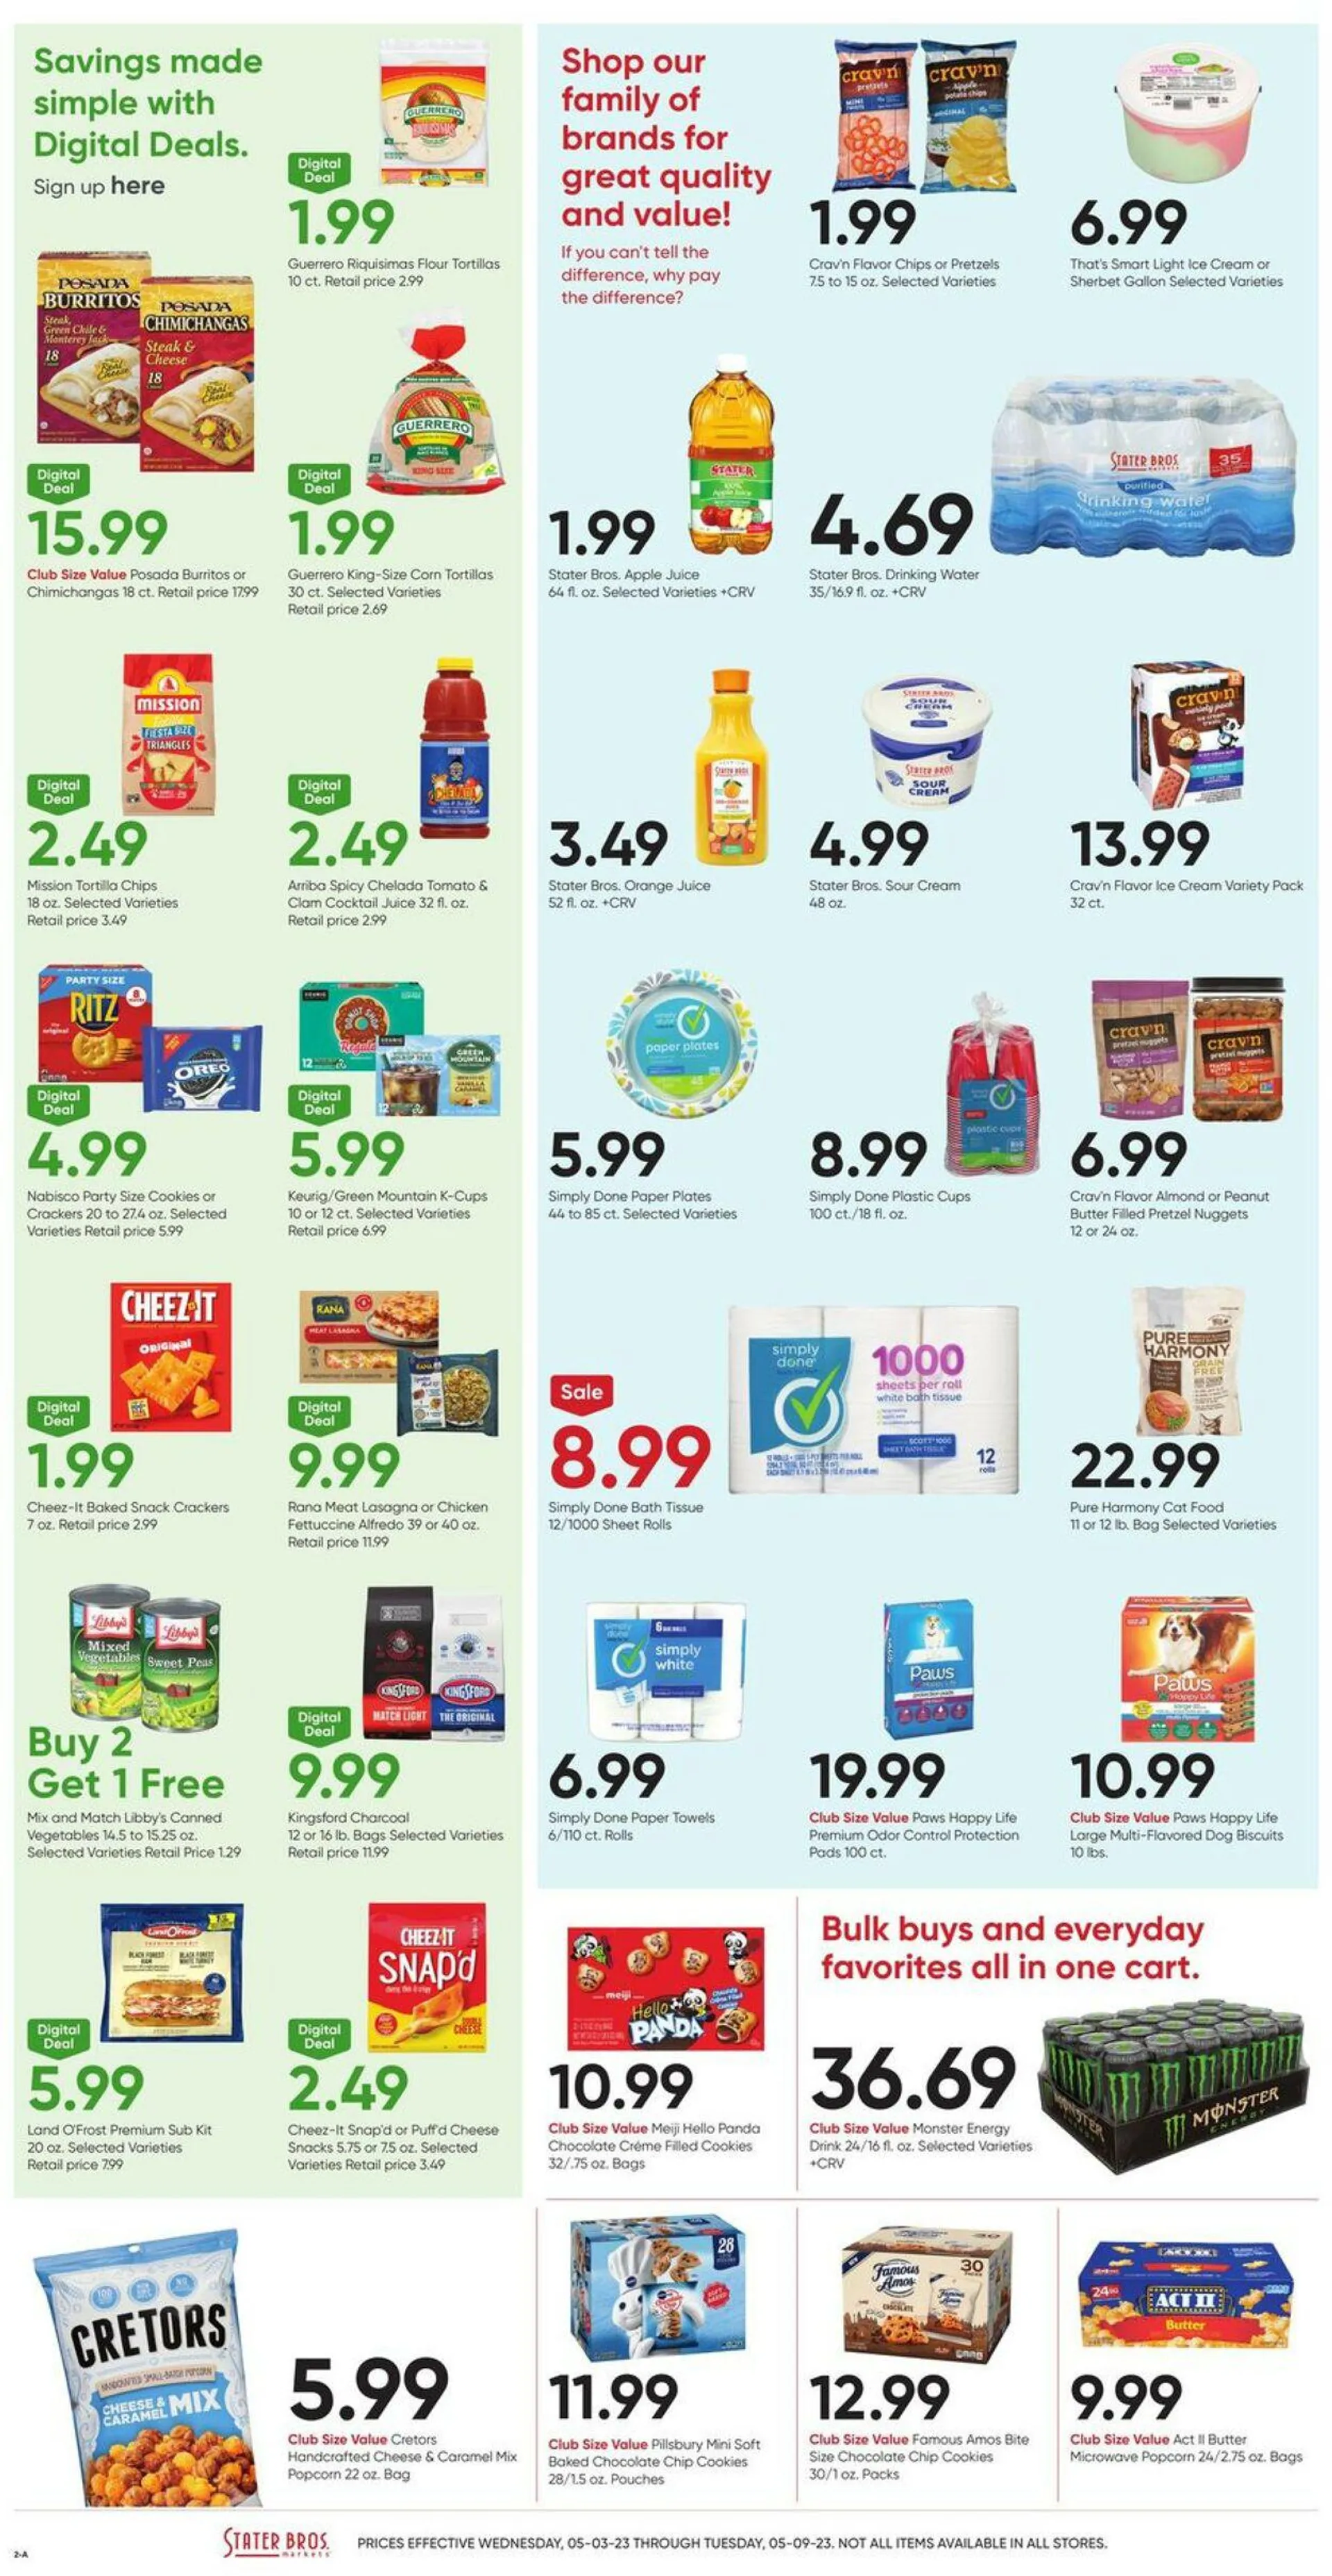 Stater Bros. Current weekly ad - 2